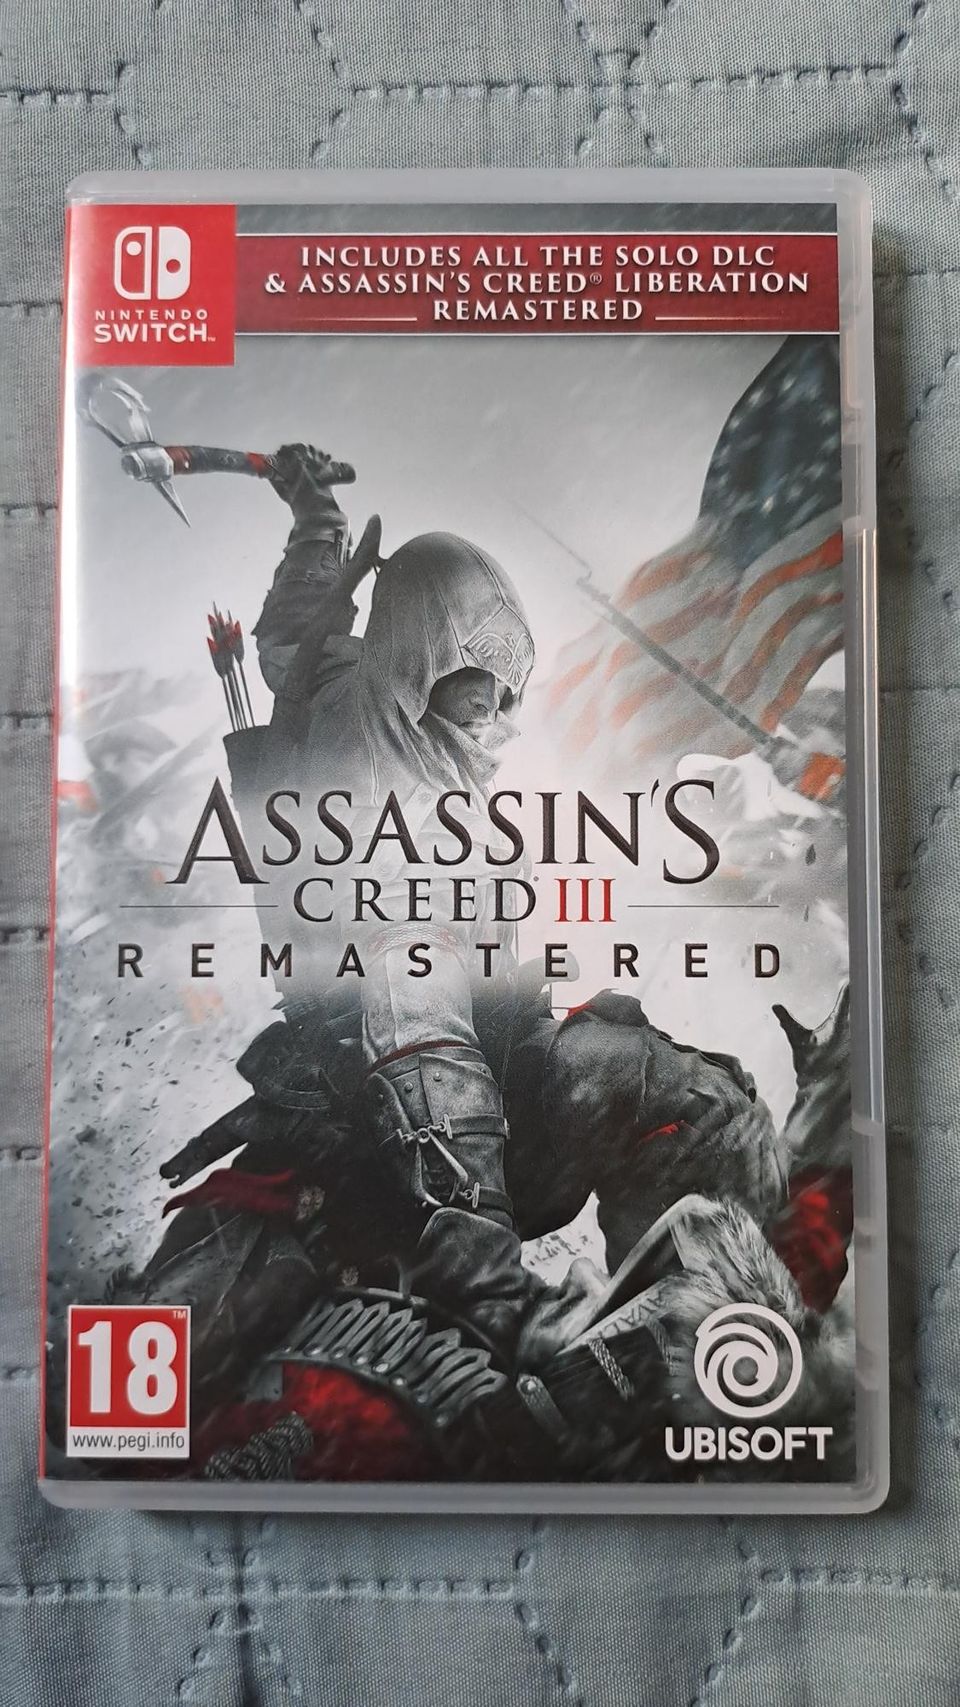 Switch "Assassin's creed III remastered "